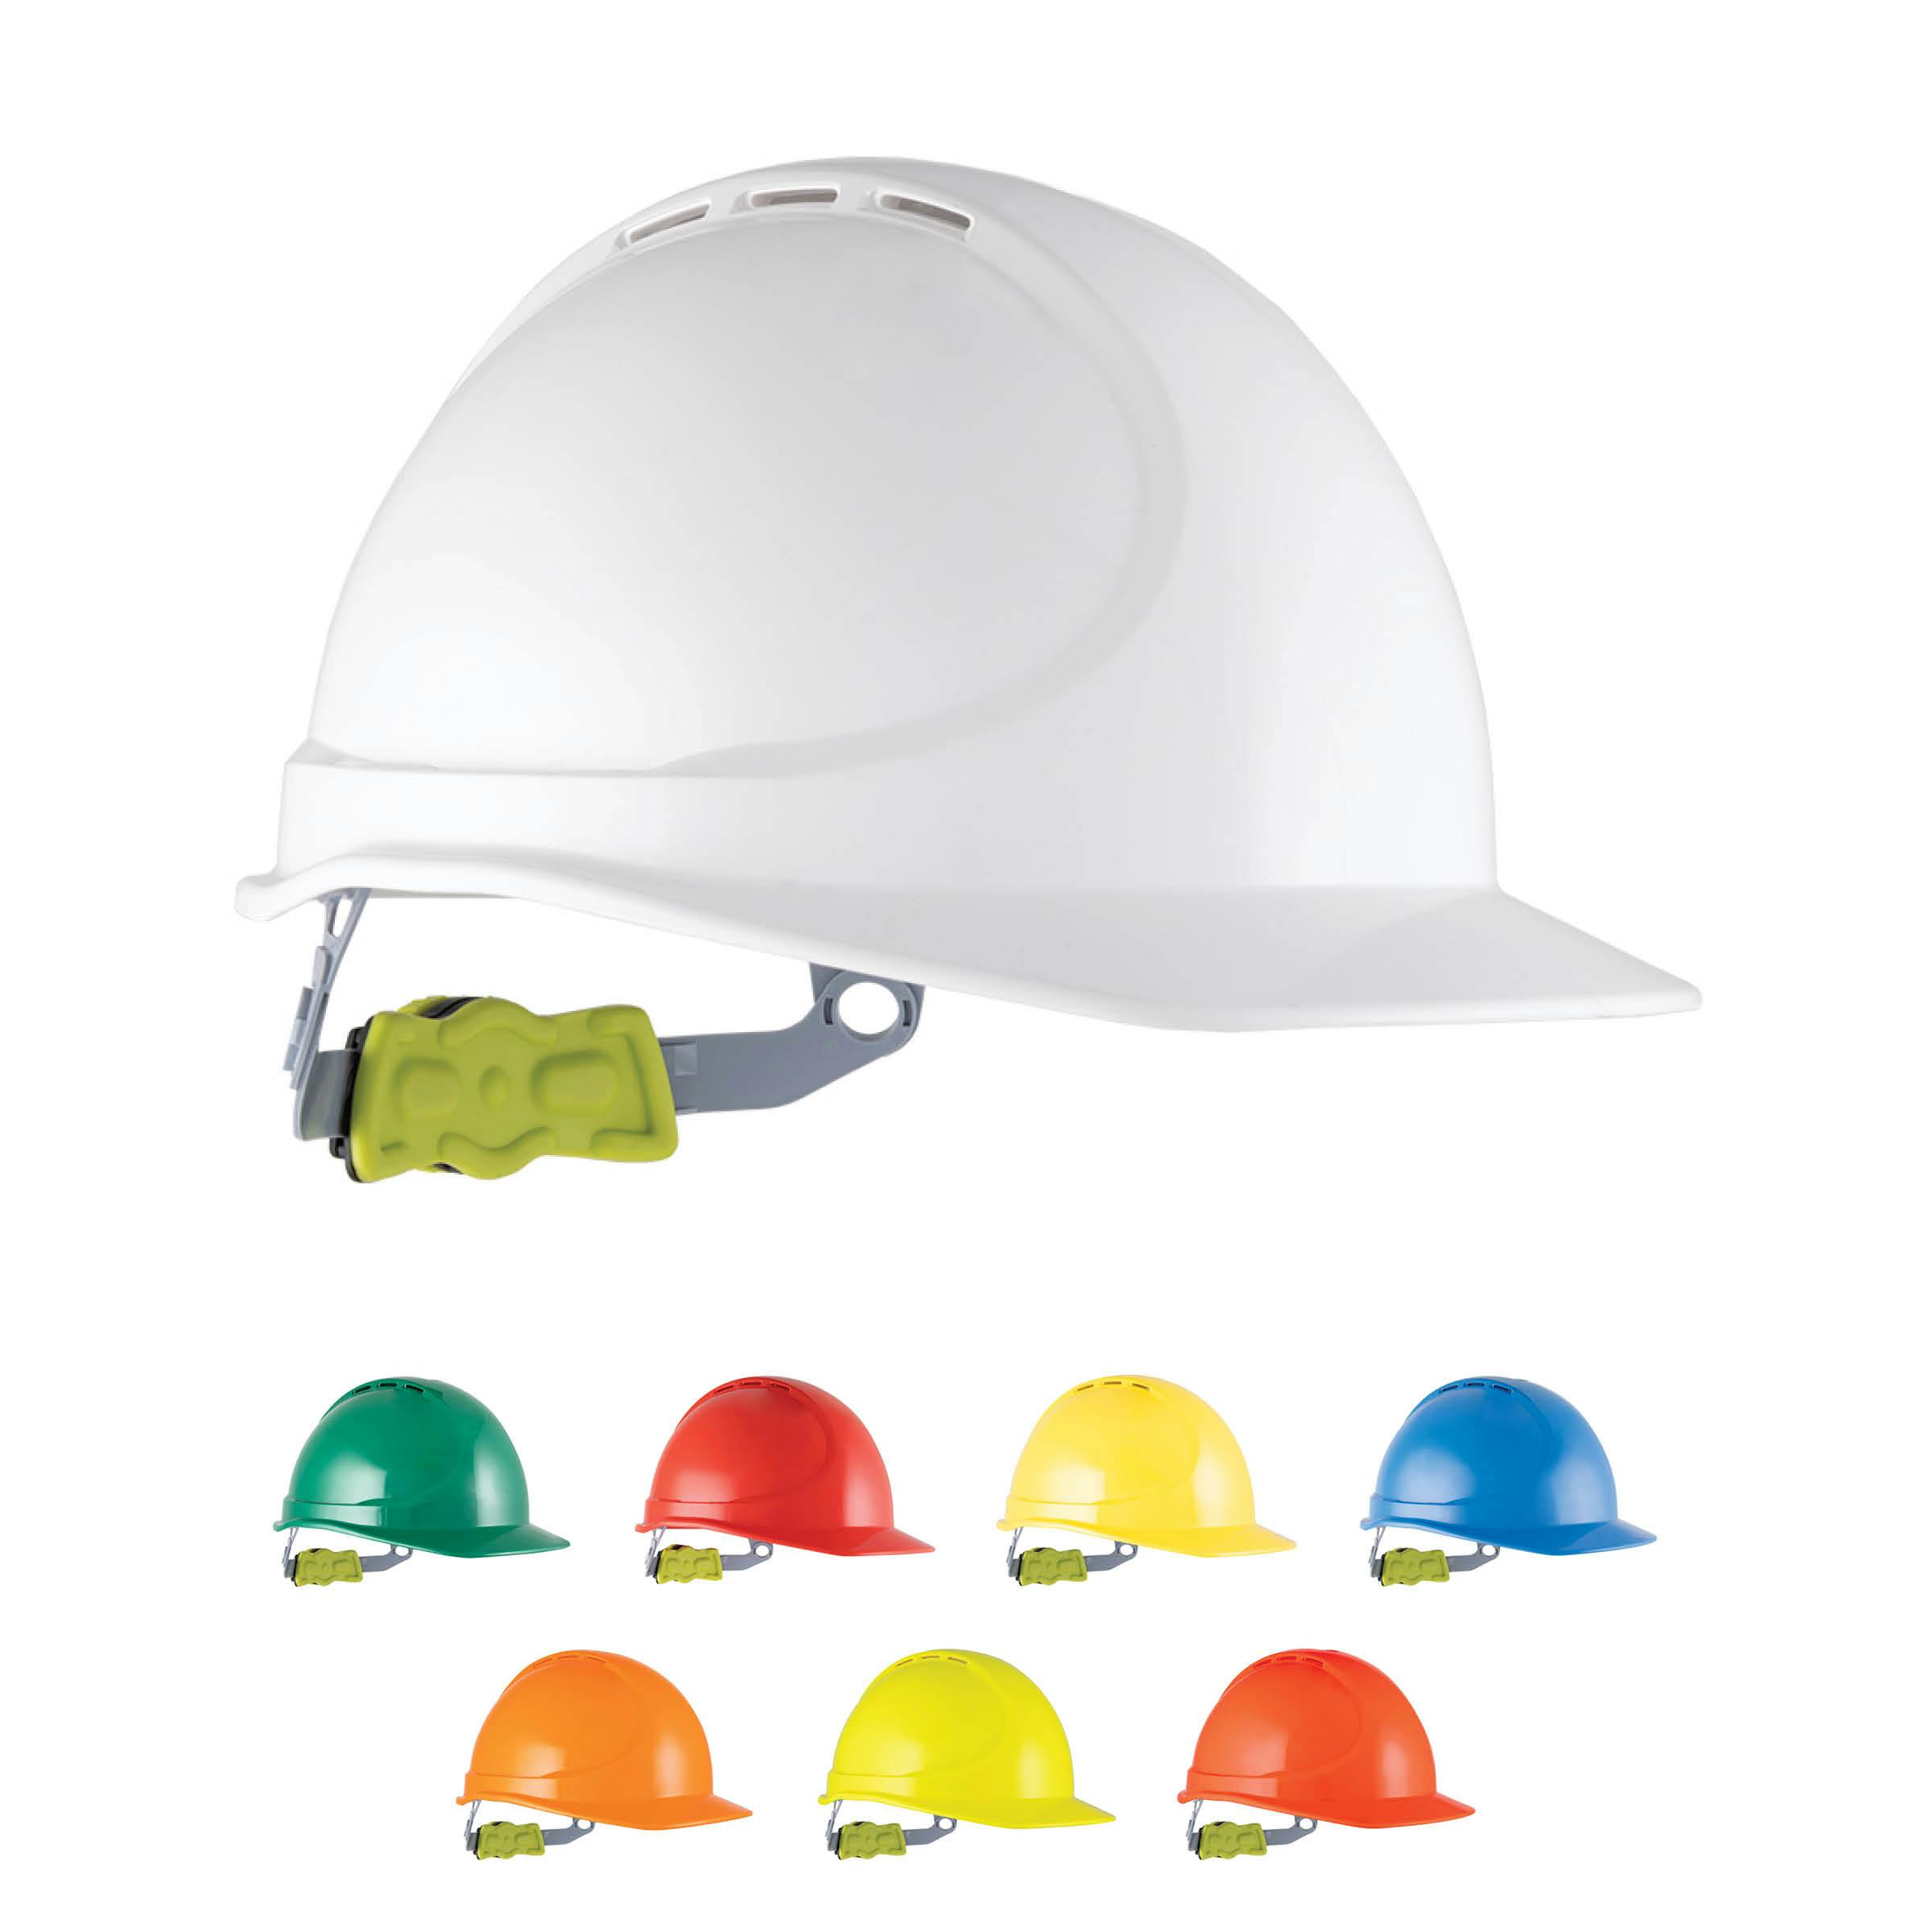 Force360 GTE1 ABS Vented Hard Hat With Ratchet Harness, Type 1_2